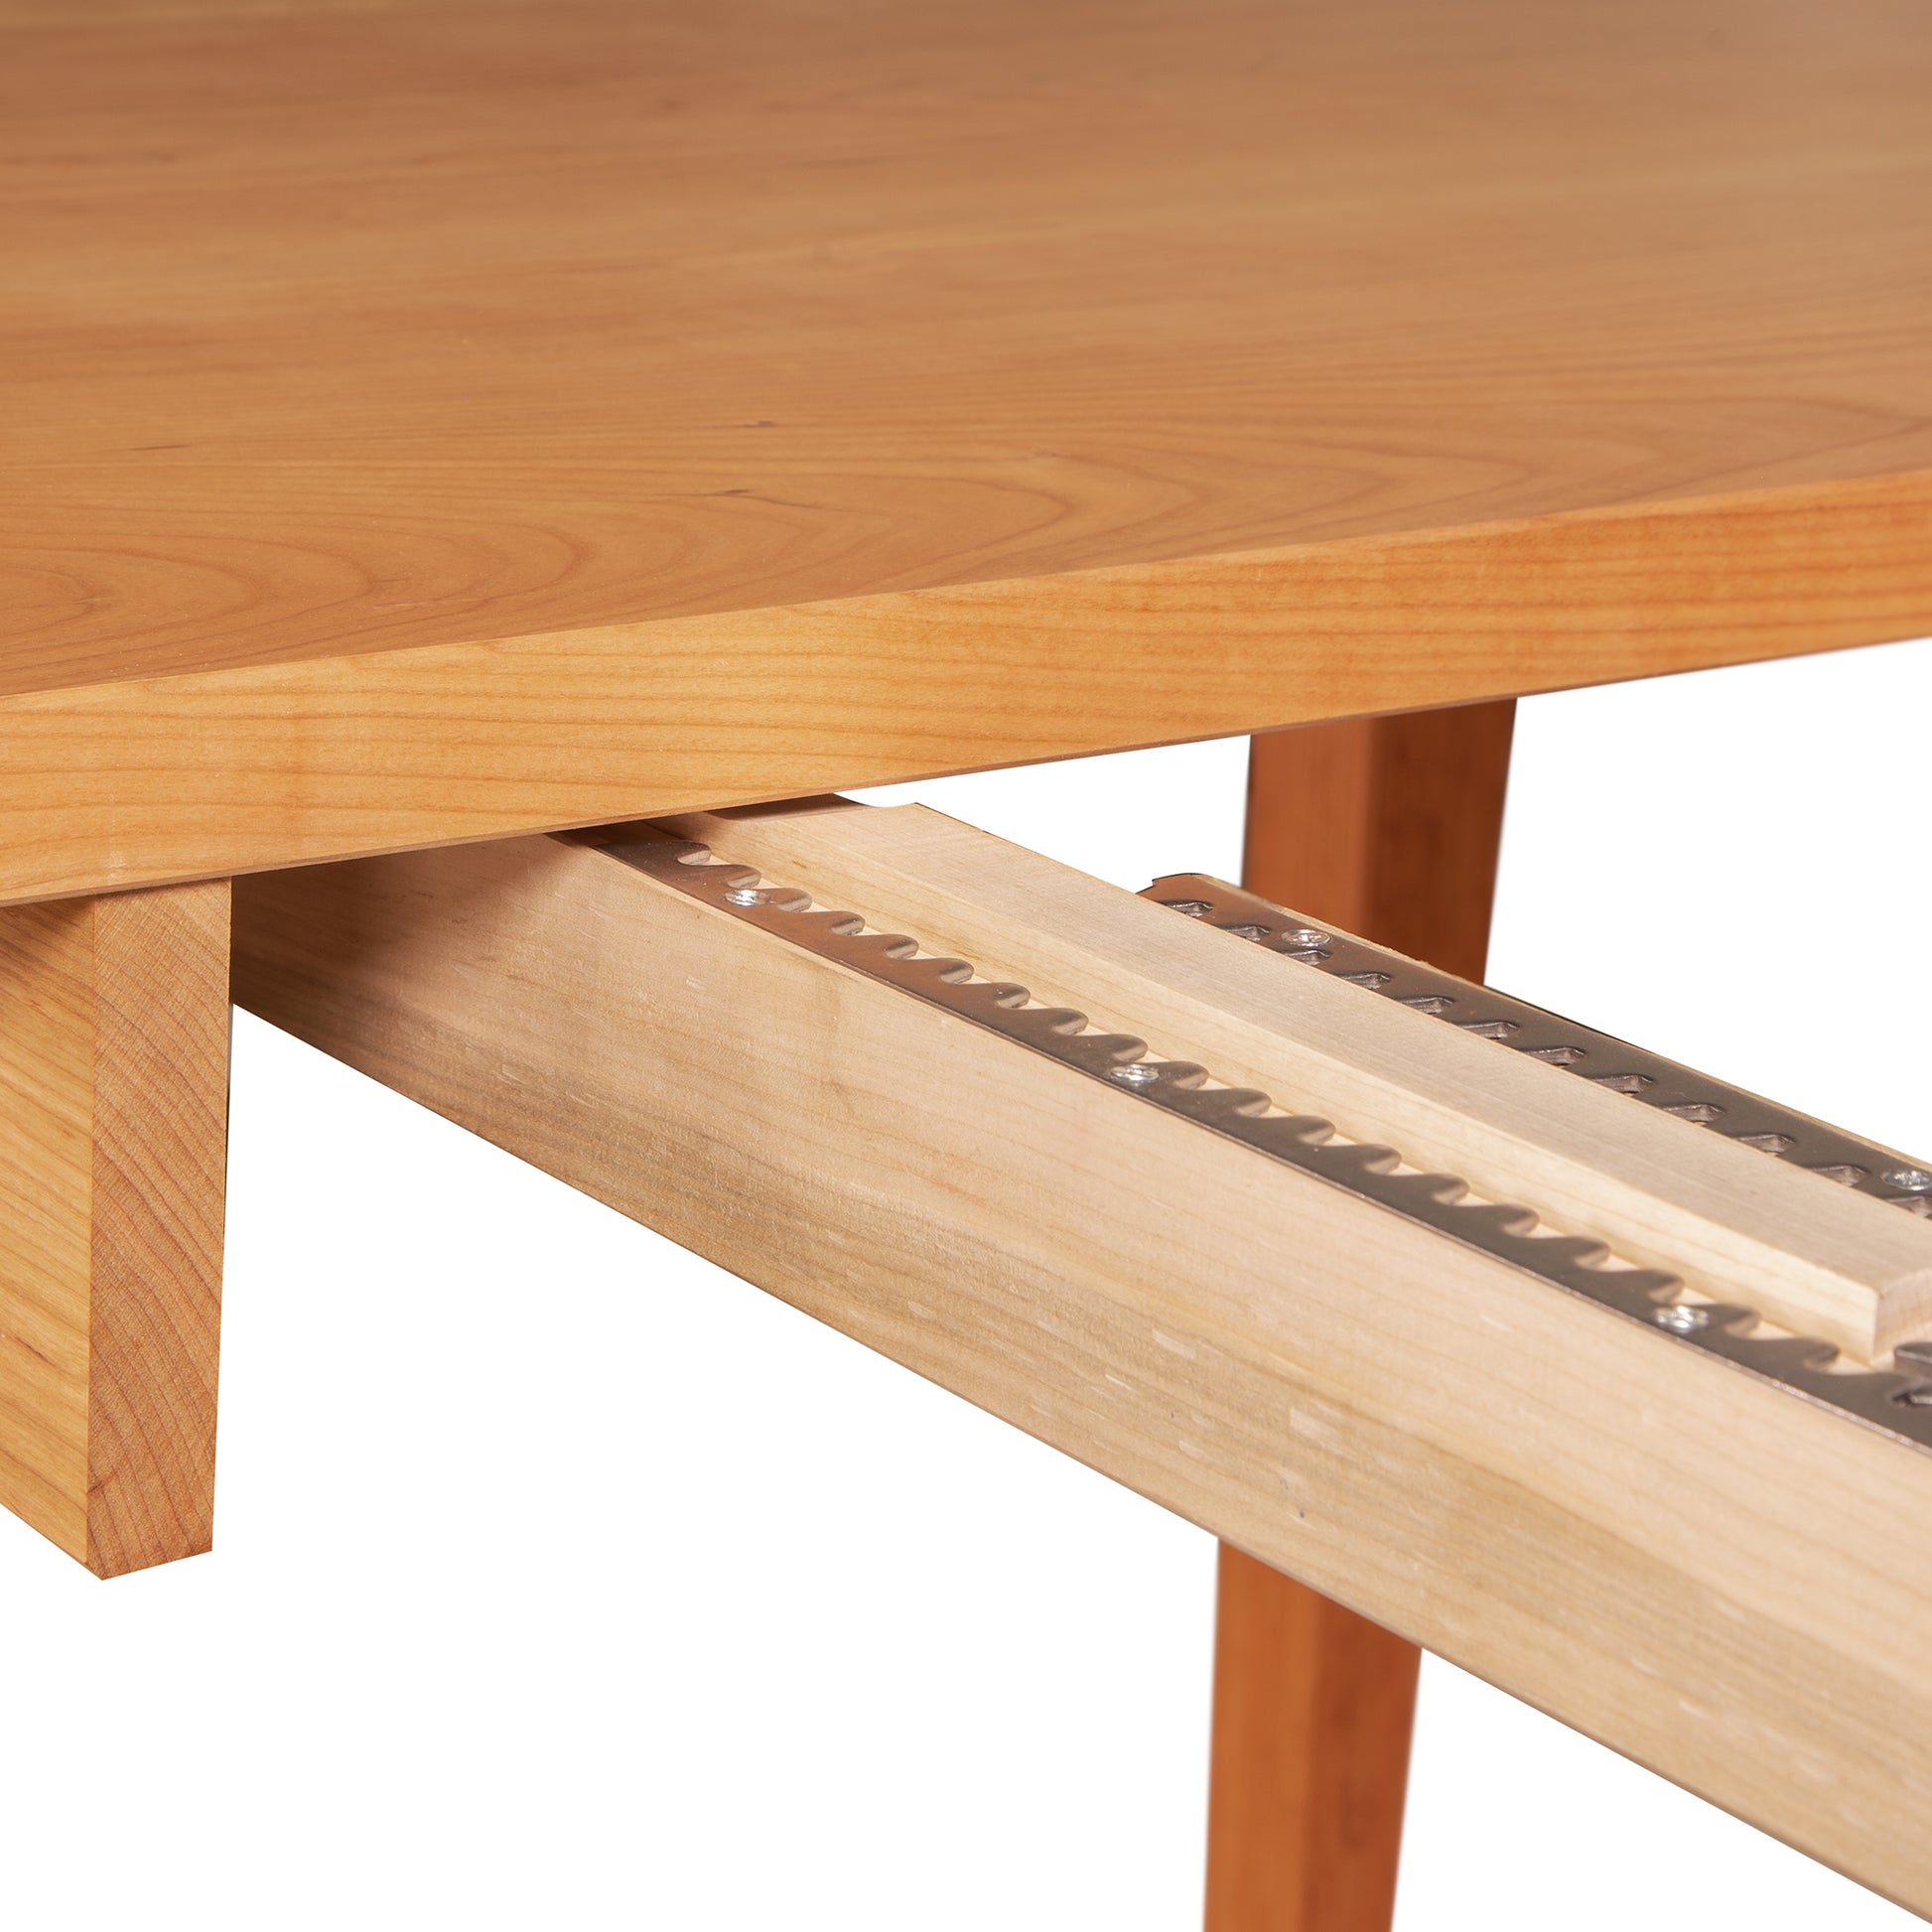 A Maple Corner Woodworks Vermont Shaker Rectangular Extension Dining Table - Clearance with an extended leaf supported by a pull-out wooden bracket.